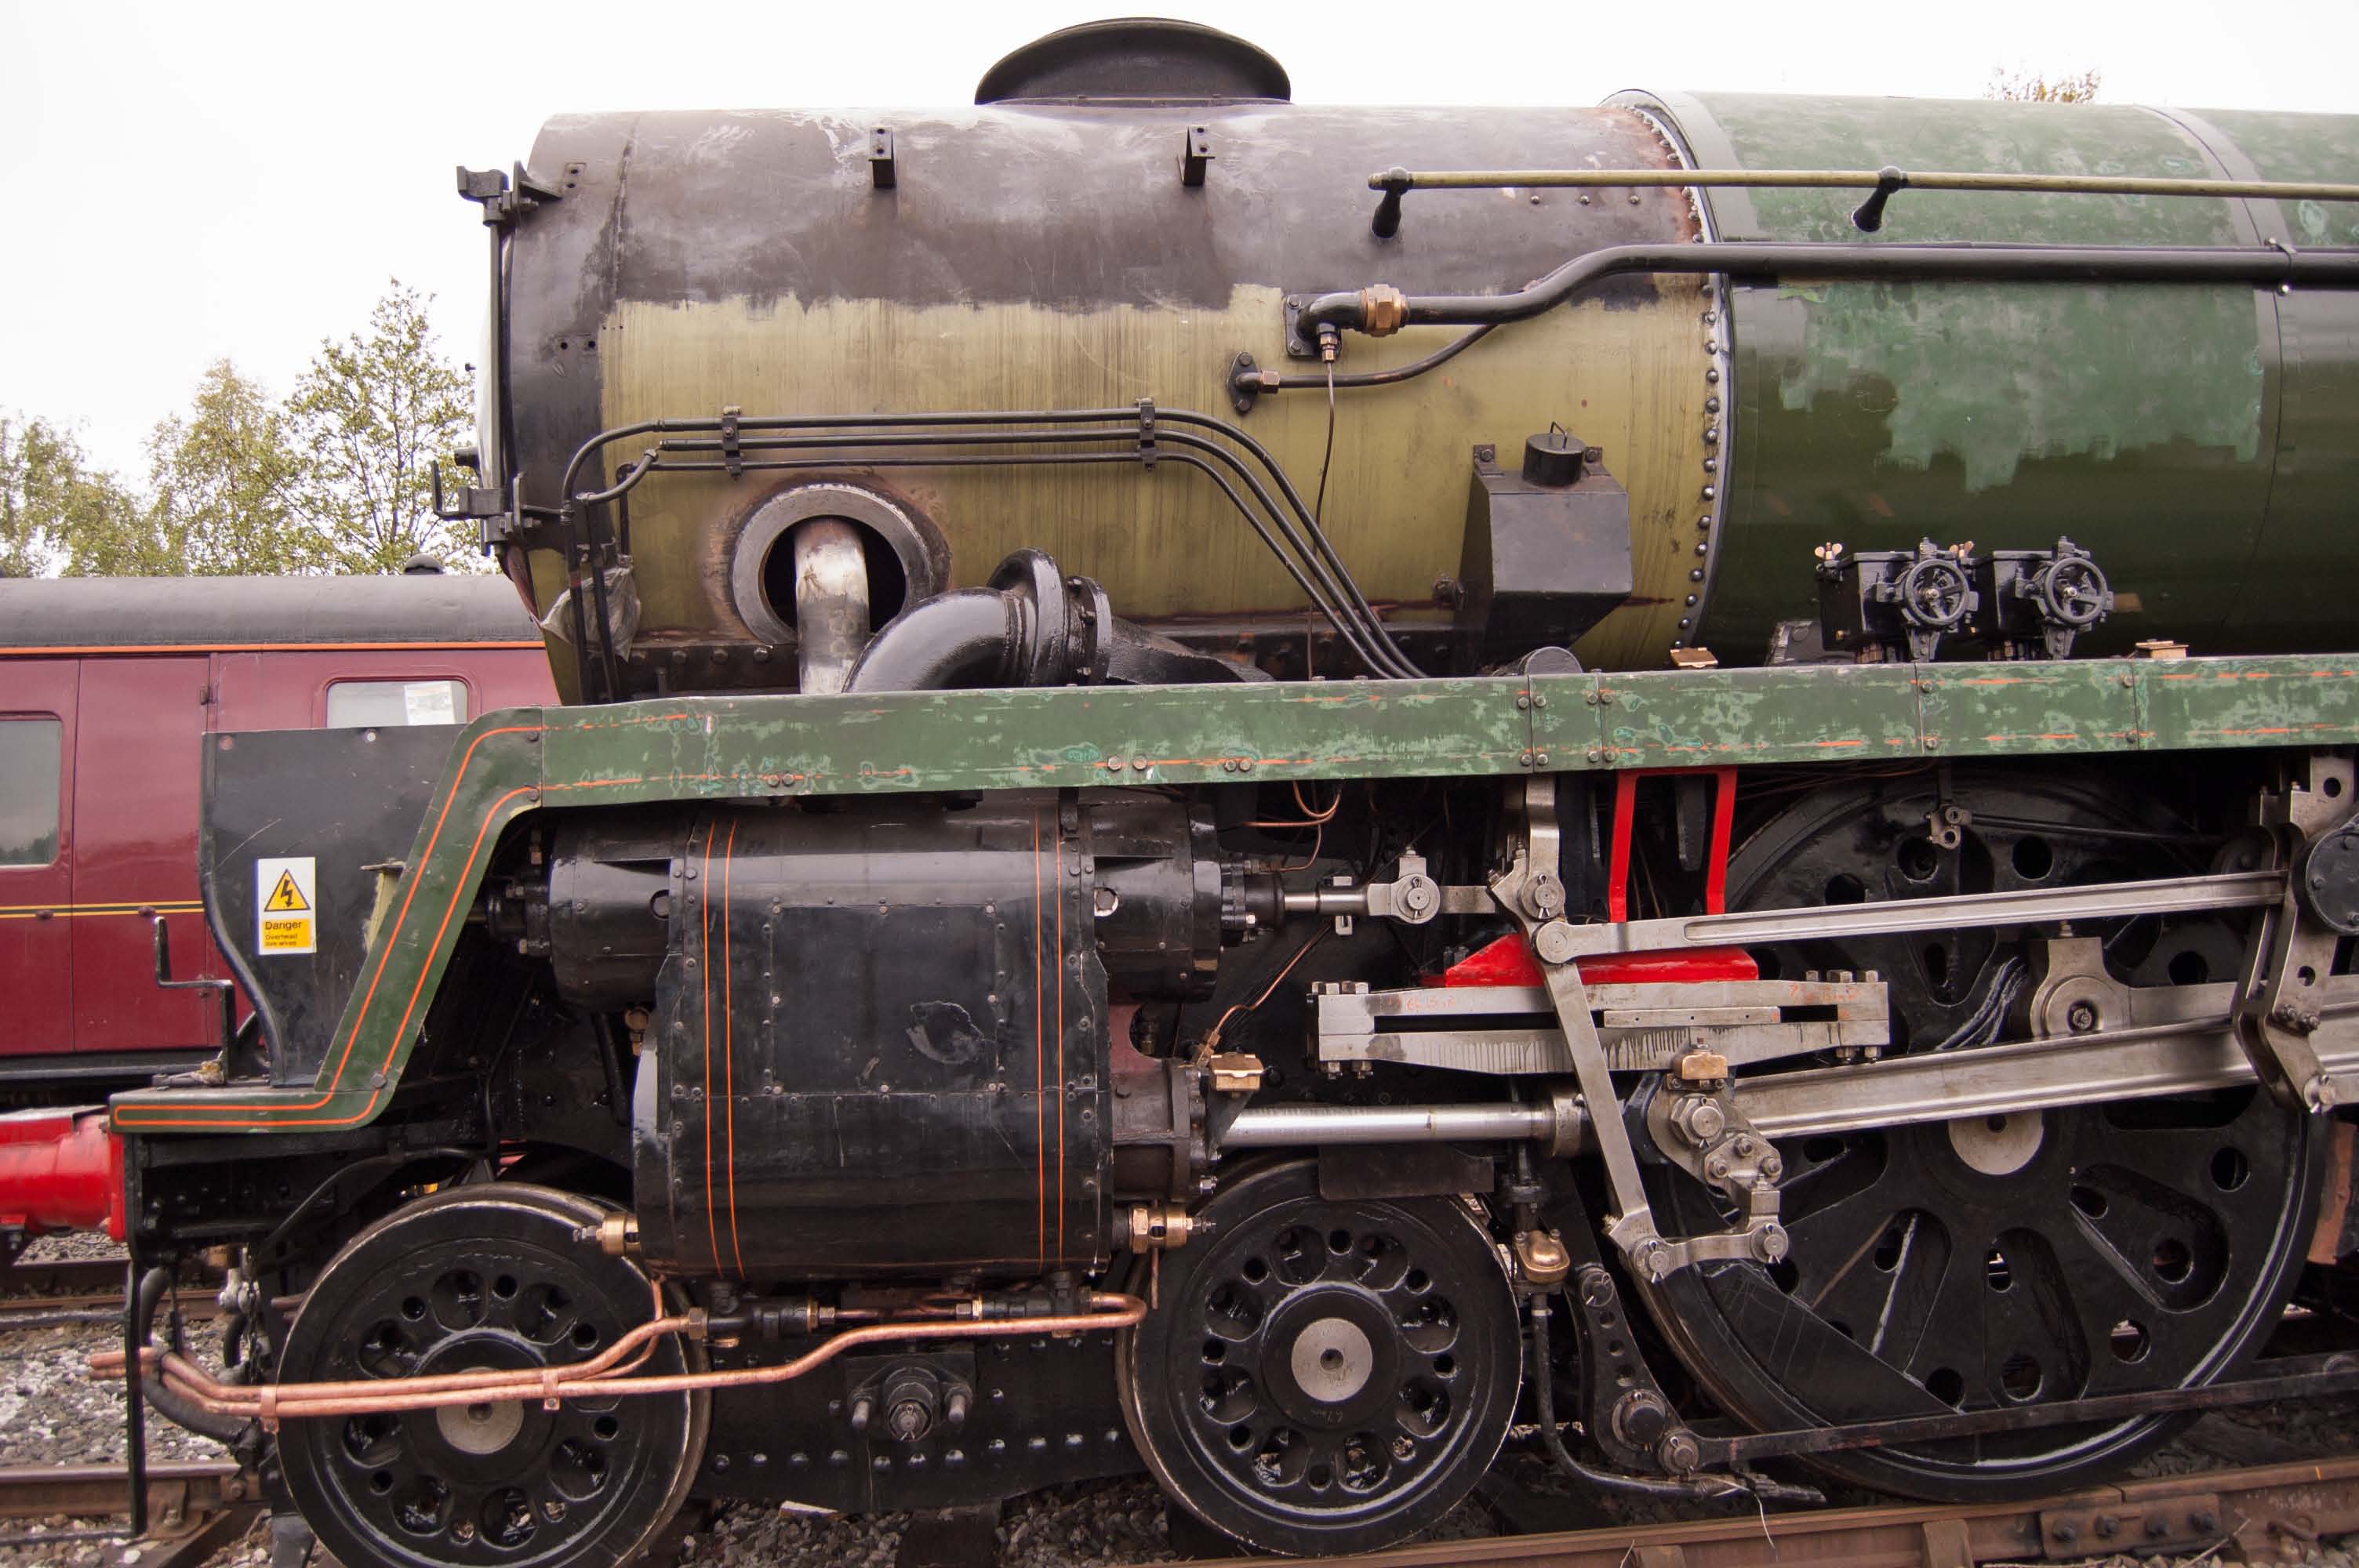 The loco is being moved, prior to weighing